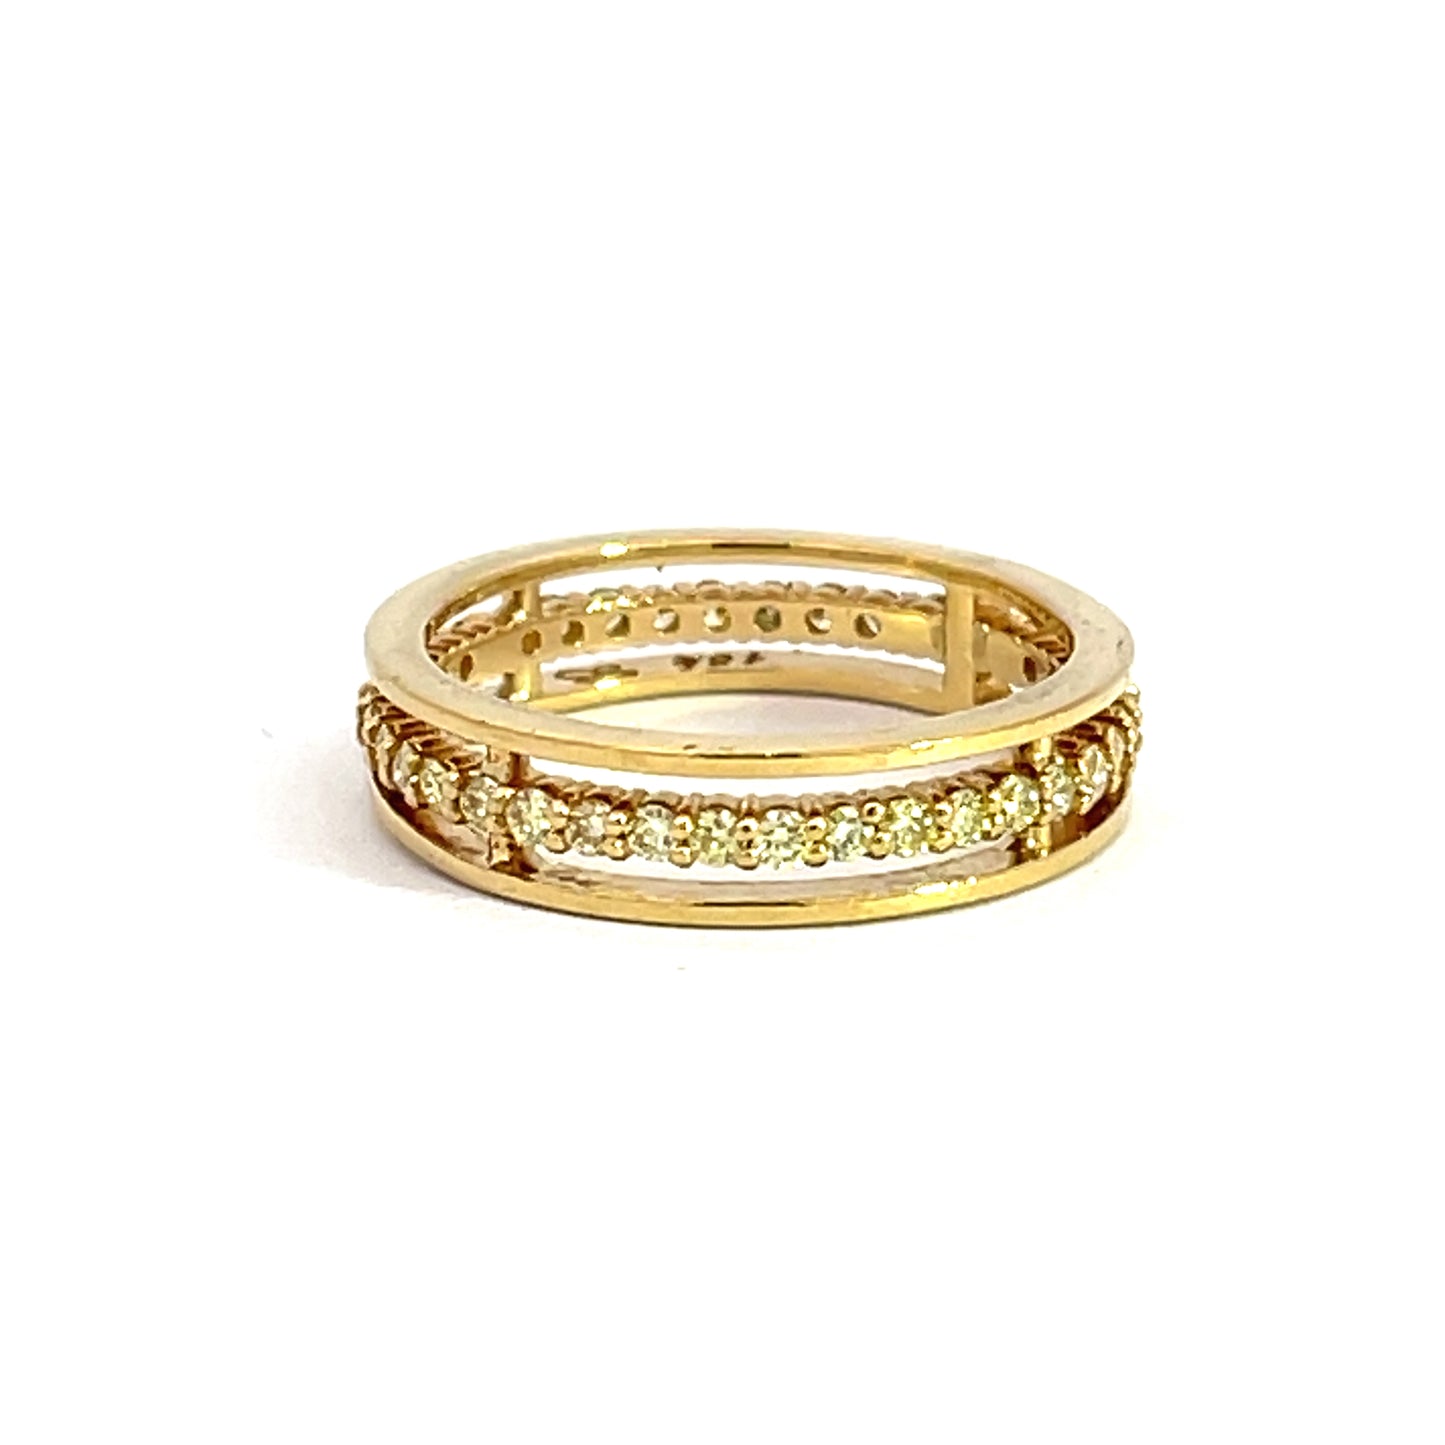 18k Yellow Gold and Yellow Diamond Floating Ring